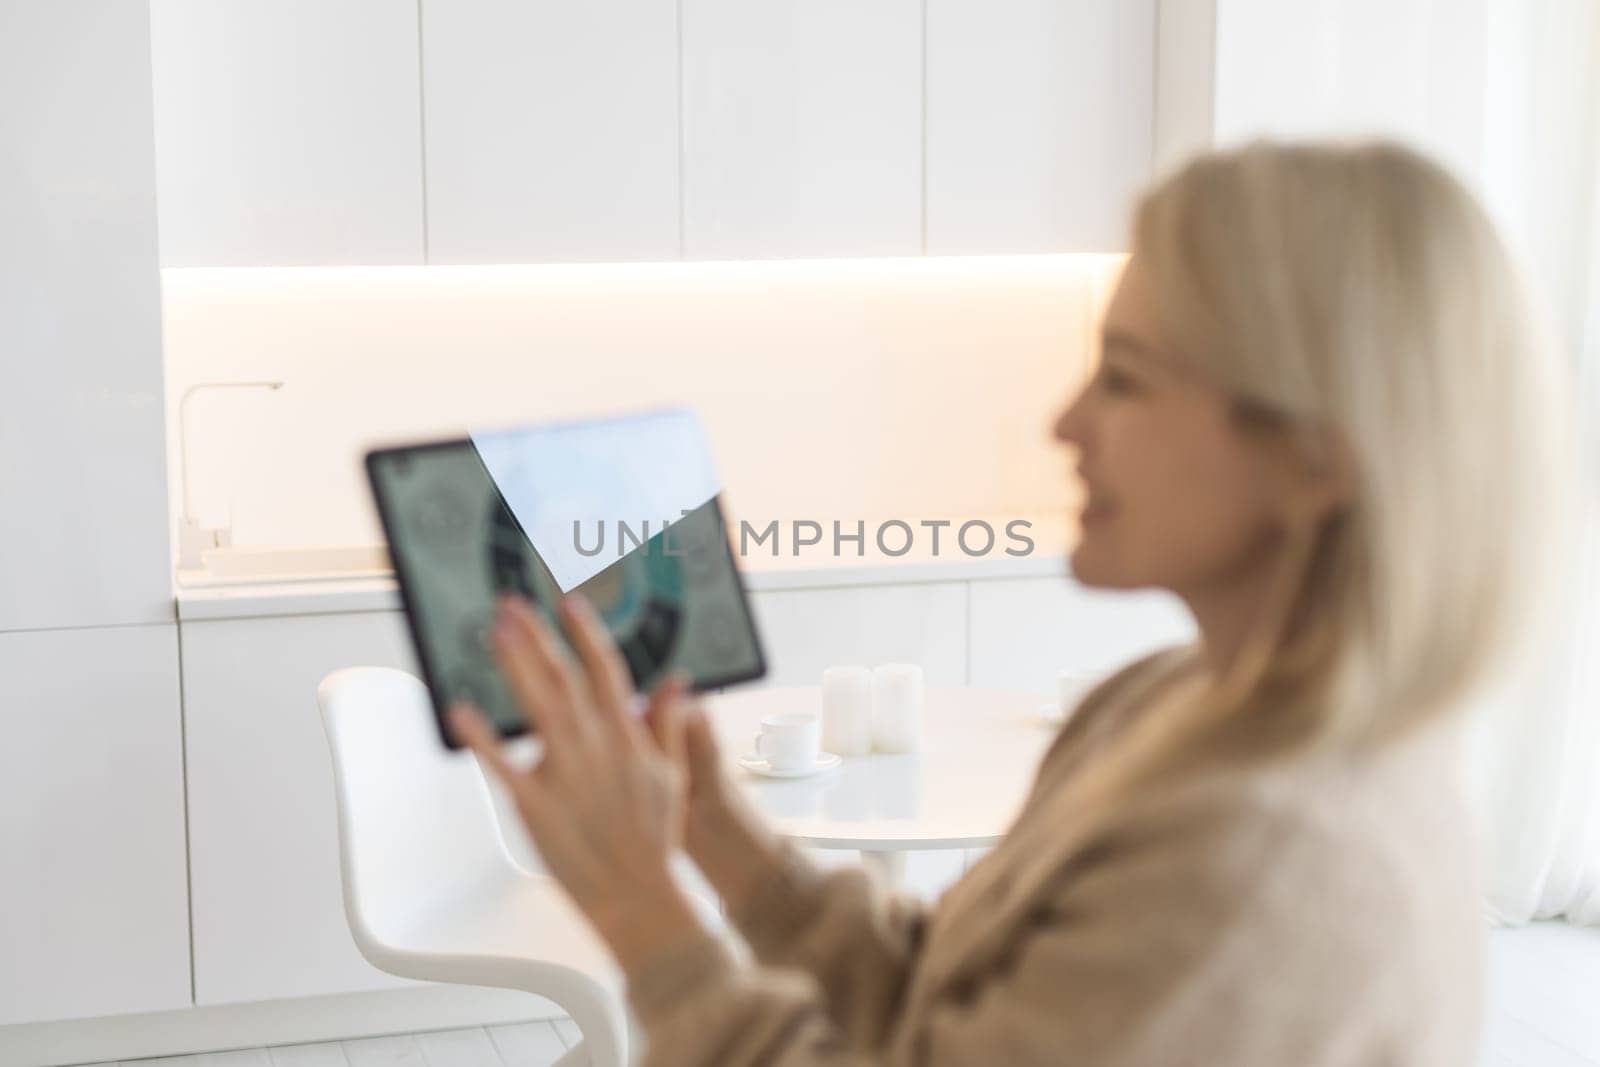 Woman controlling smart home devices using a digital tablet with launched application in the white living room. Smart home concept.